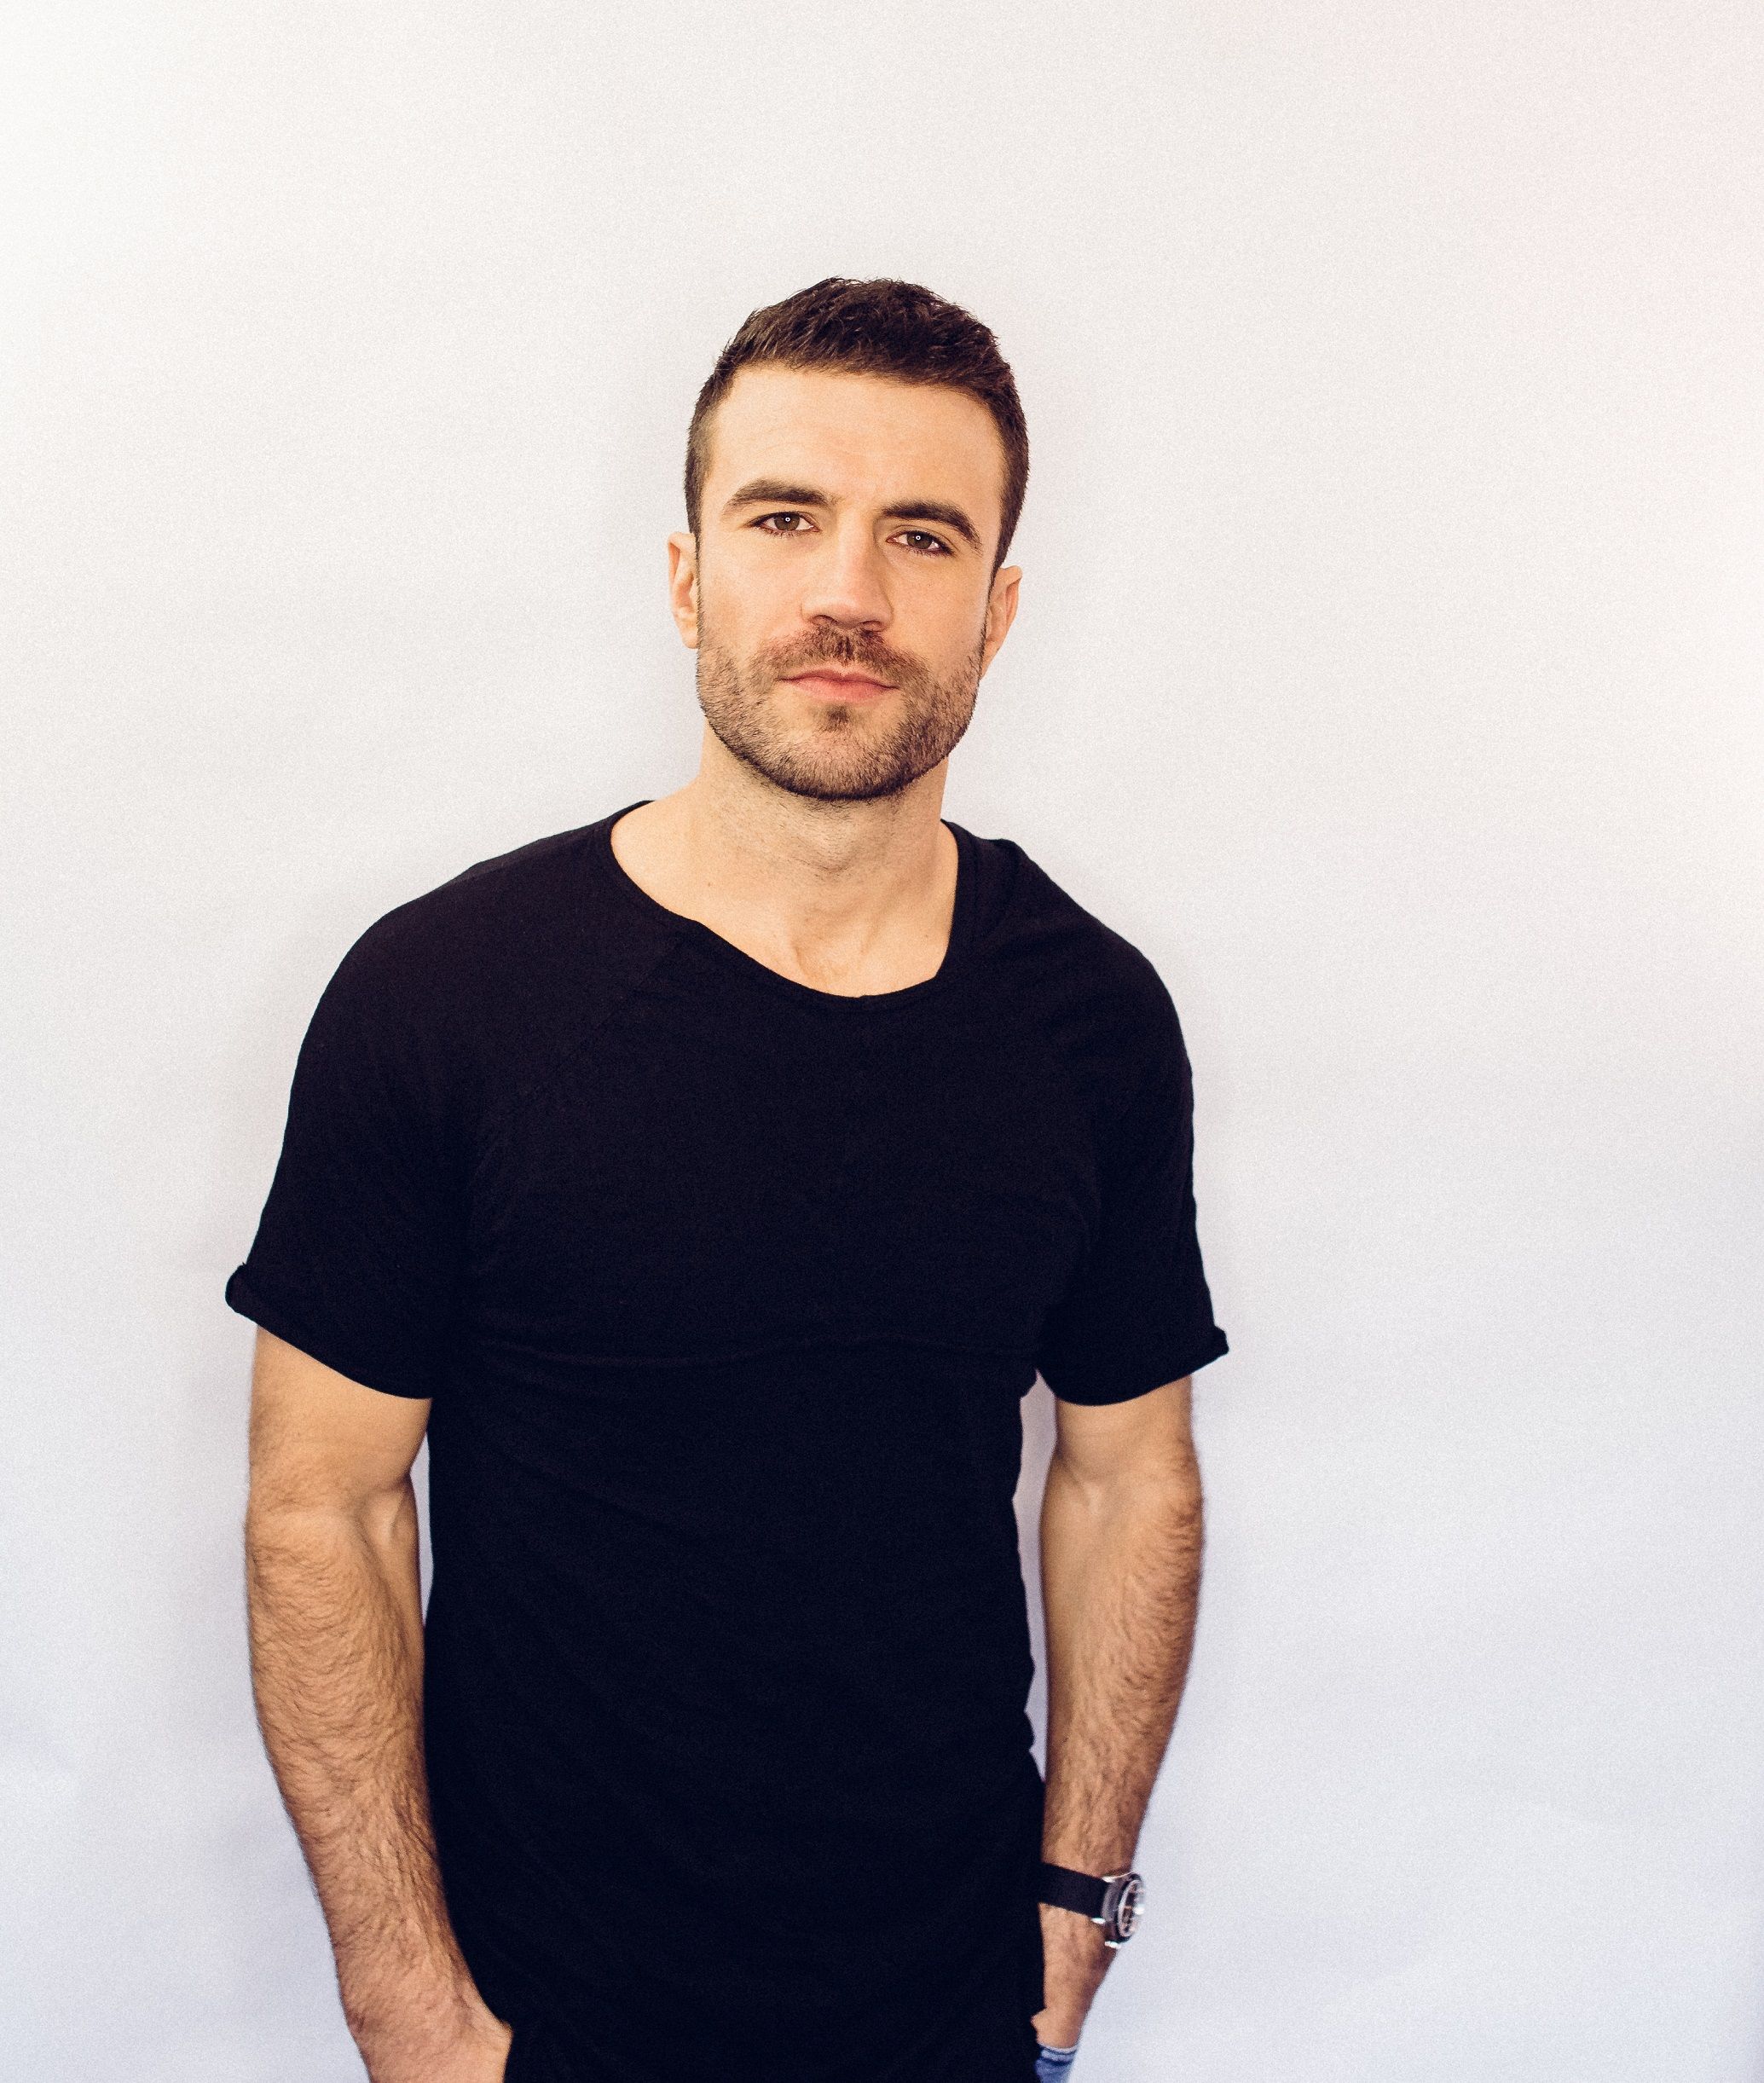 SAM HUNT ANNOUNCES HEADLINING 15 IN A 30 TOUR WITH MAREN MORRIS, CHRIS JANSON AND RYAN FOLLESE